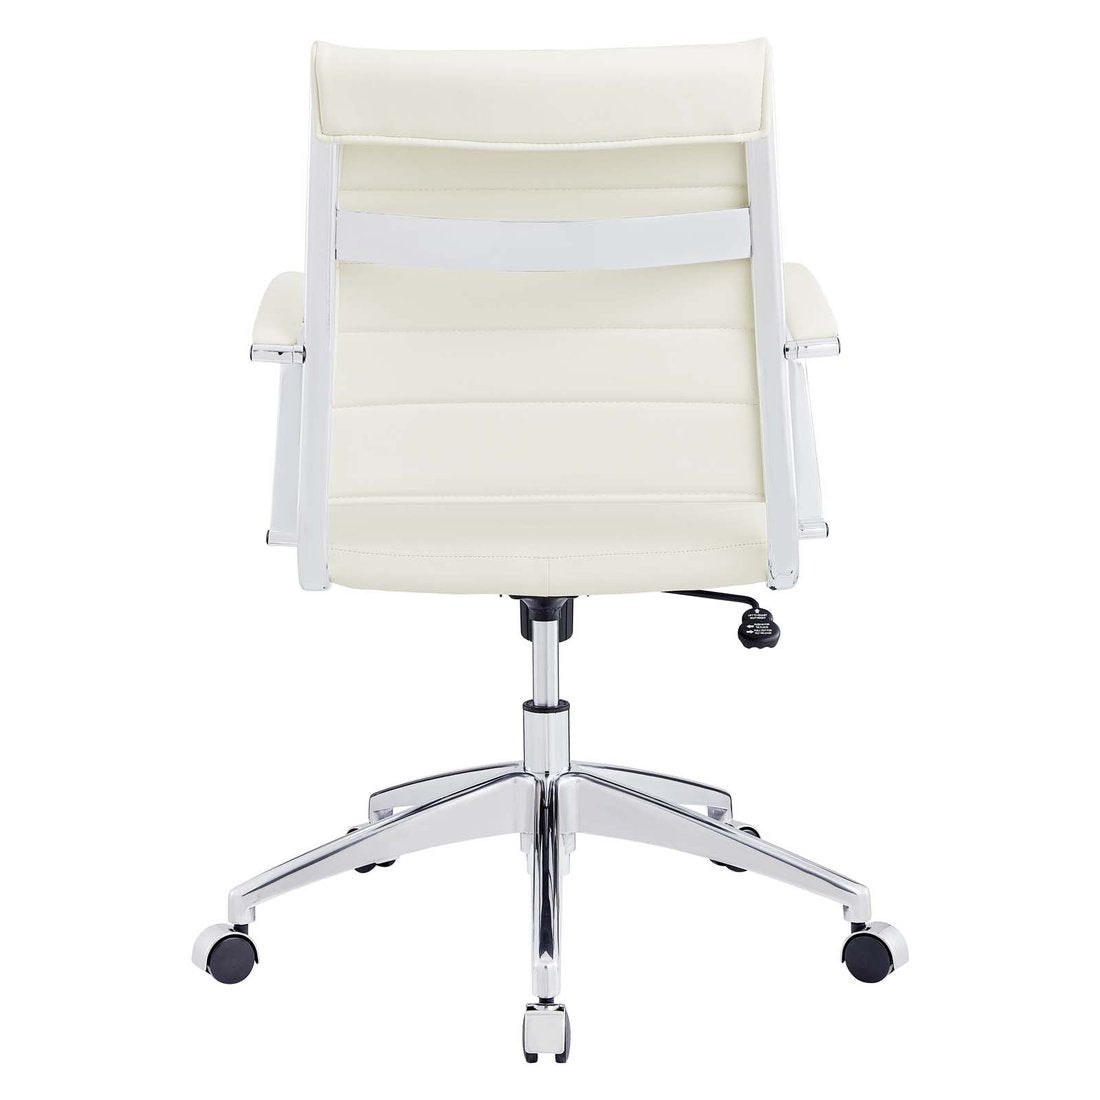 Jive Mid Back Office Chair - White